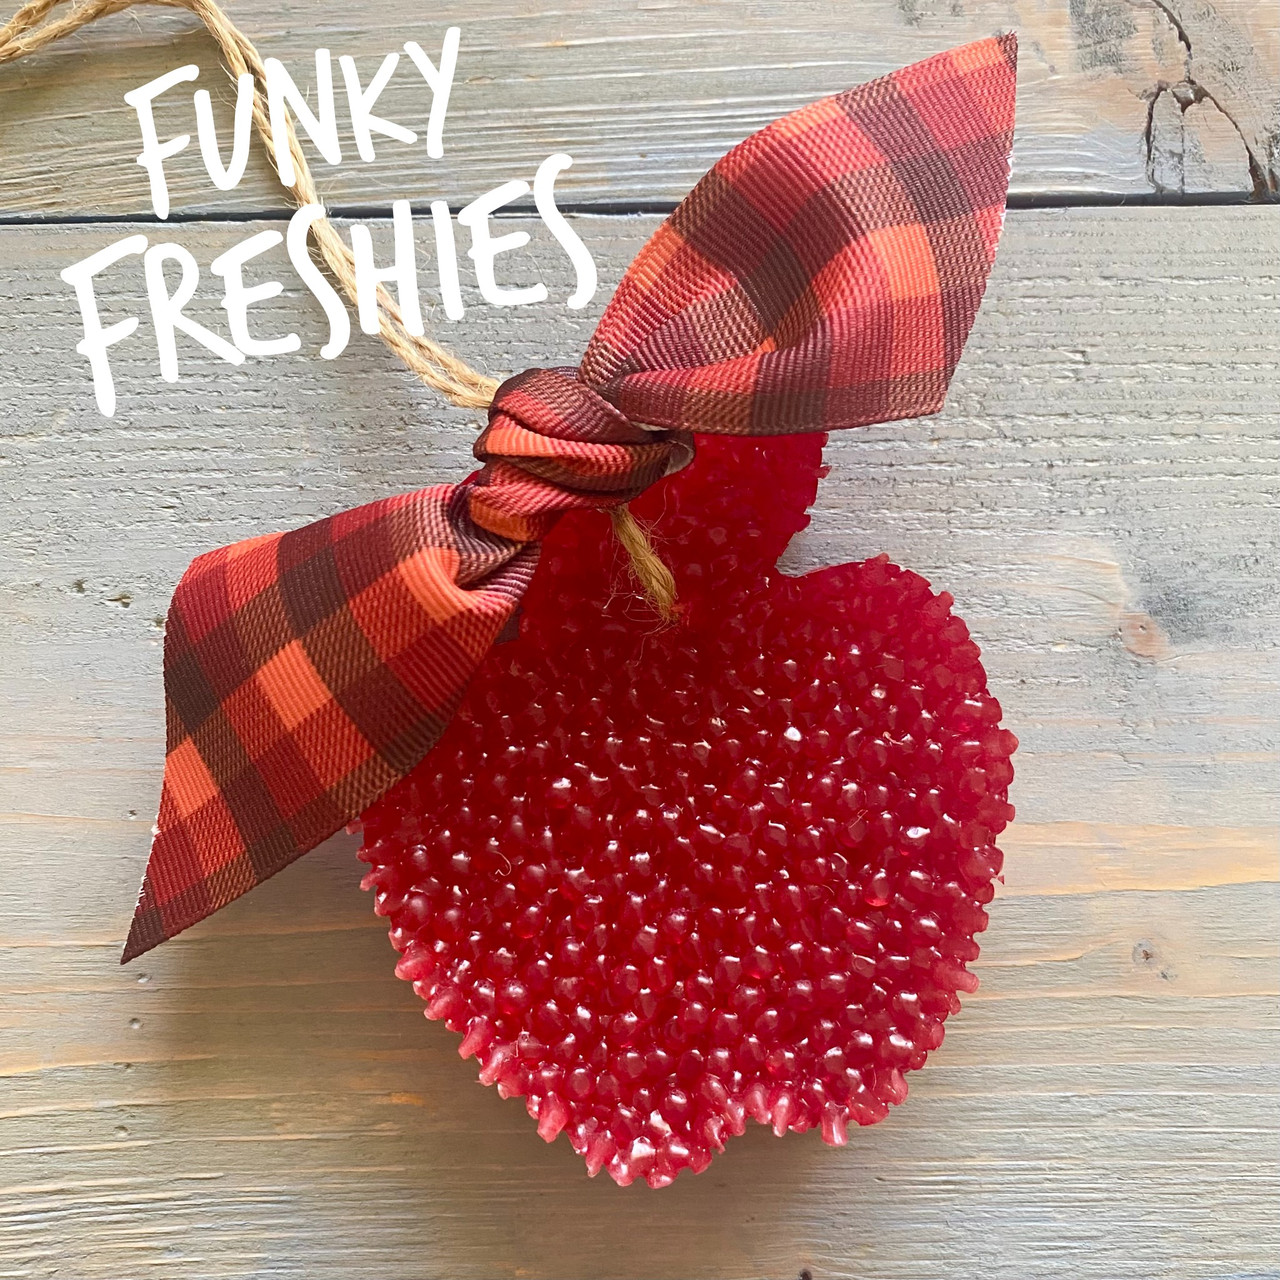 Funky Freshies Fall Apple Freshie Baked Apple Pie Scent